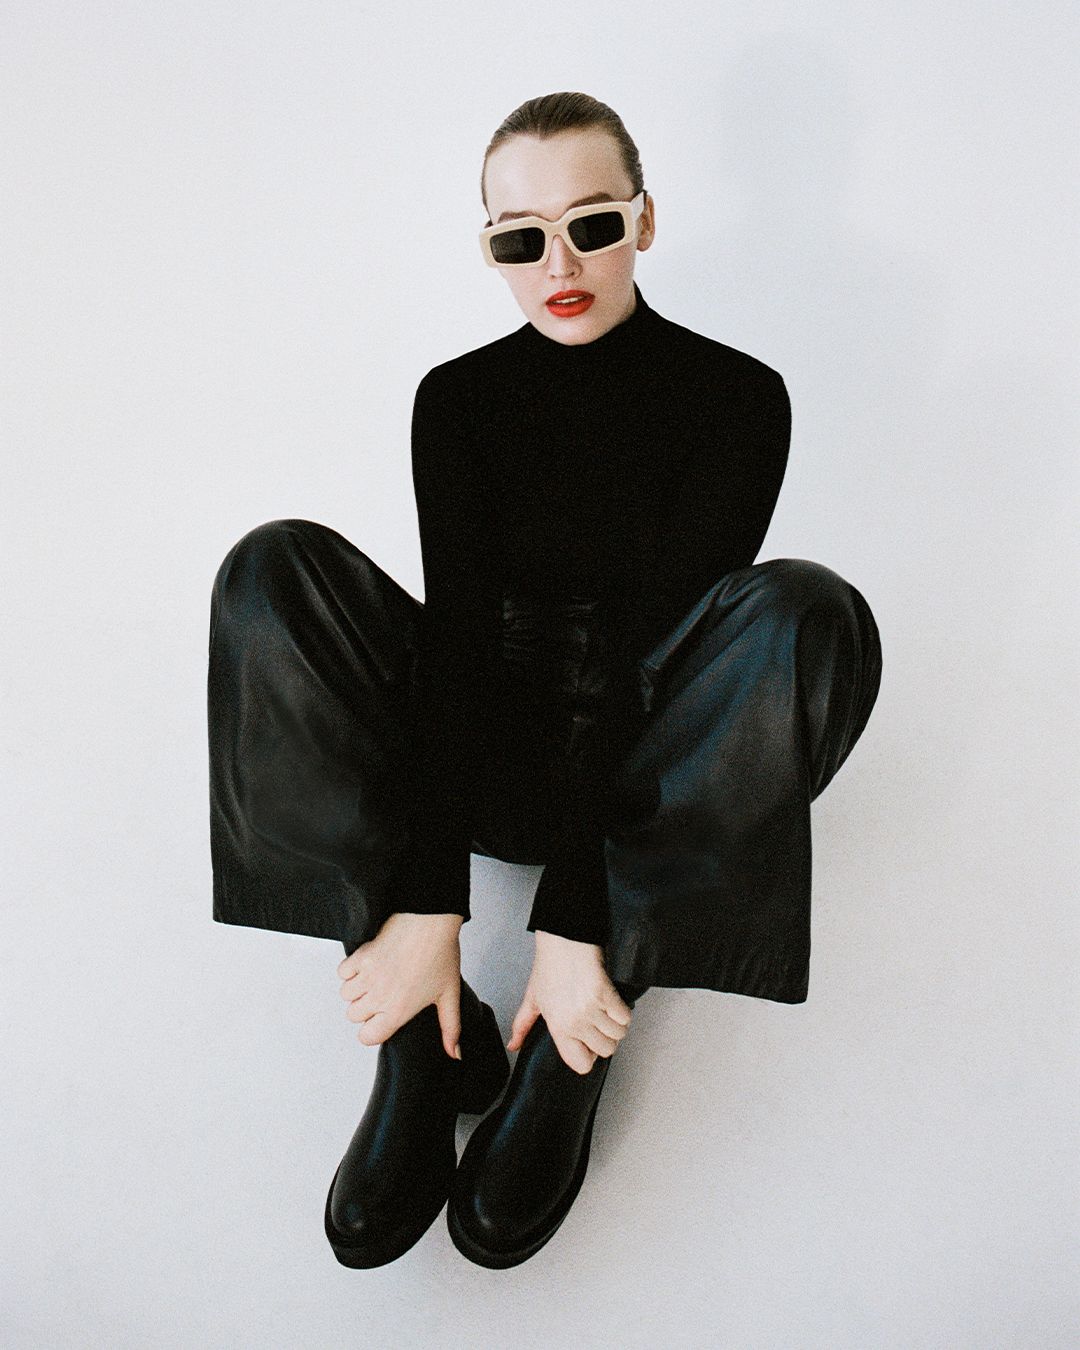 Maddison Brown sitting on the floor in black outfit with sunglasses